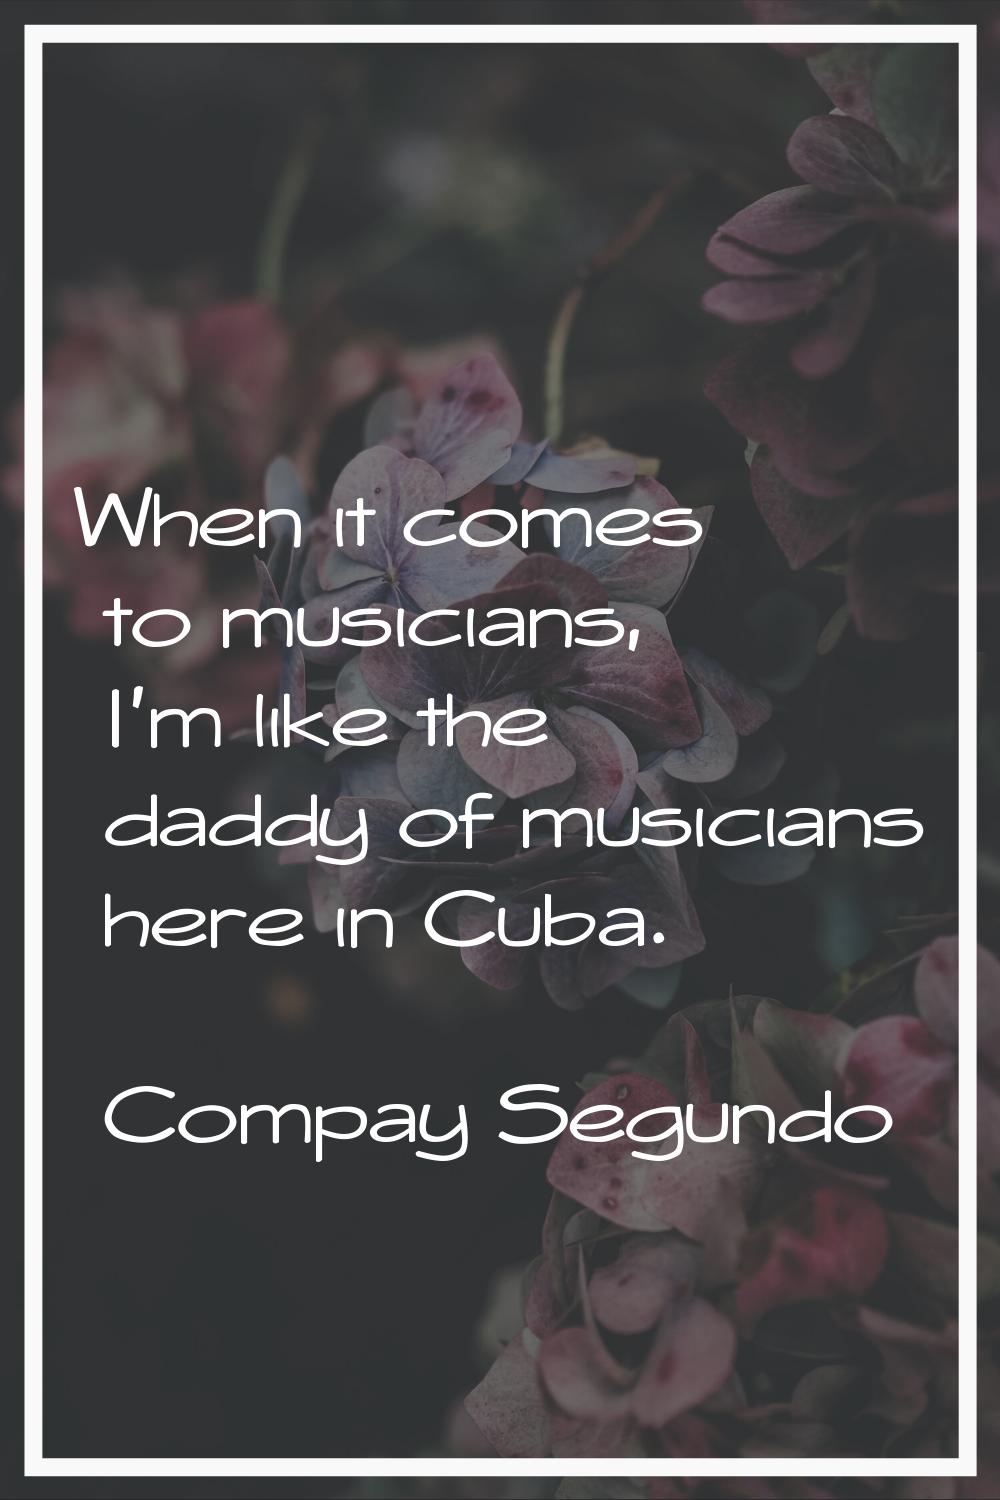 When it comes to musicians, I'm like the daddy of musicians here in Cuba.